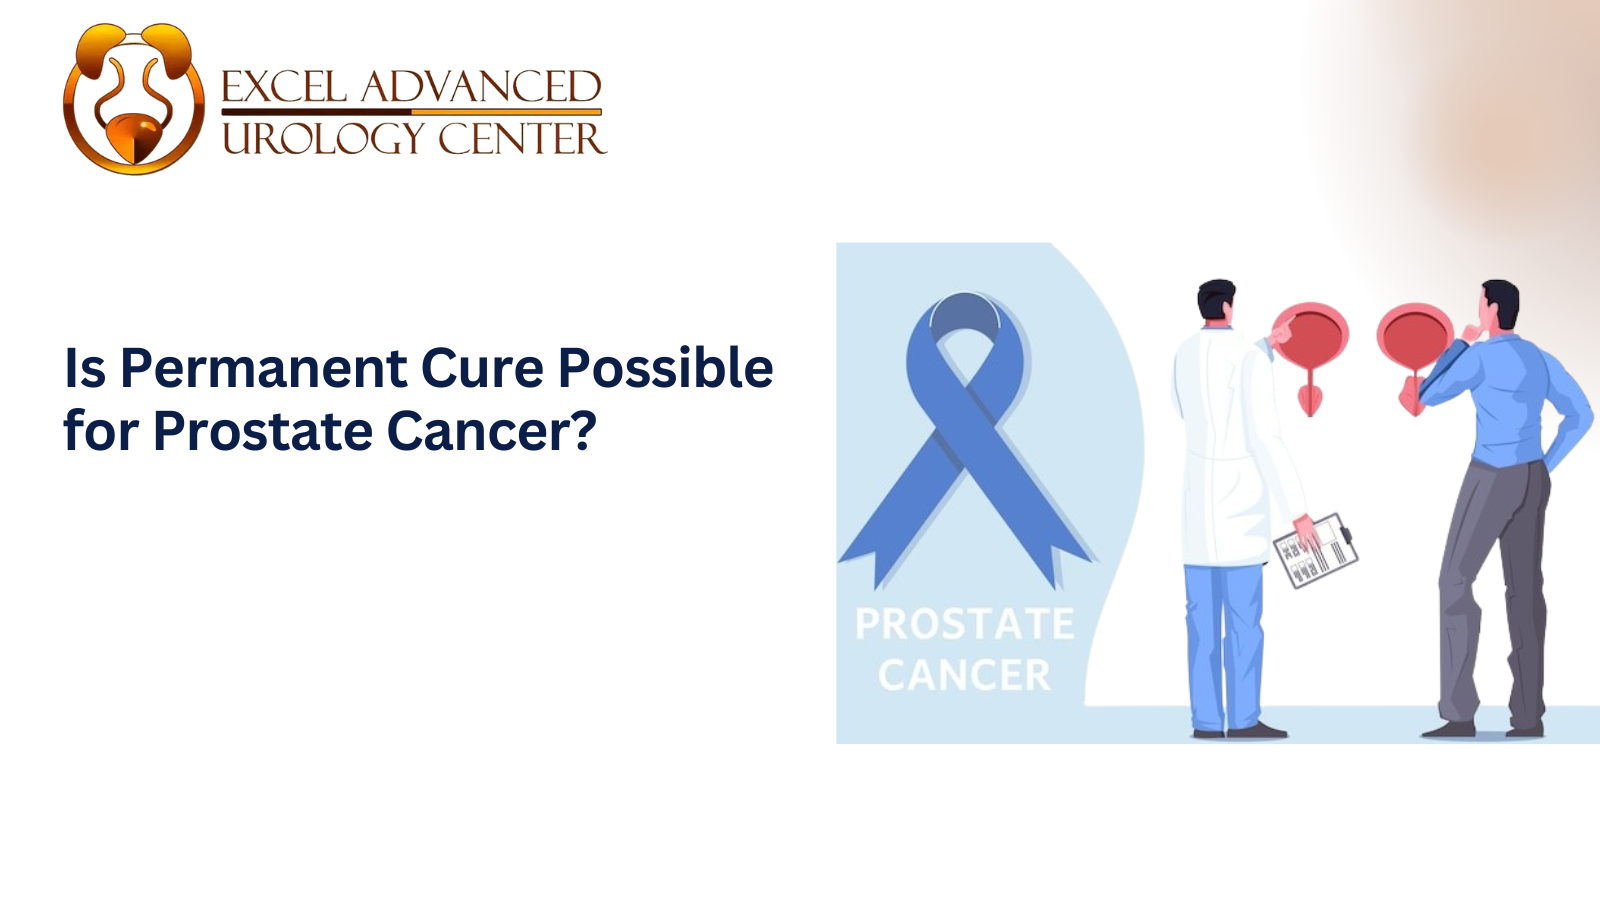 Is Permanent Cure Possible for Prostate Cancer?